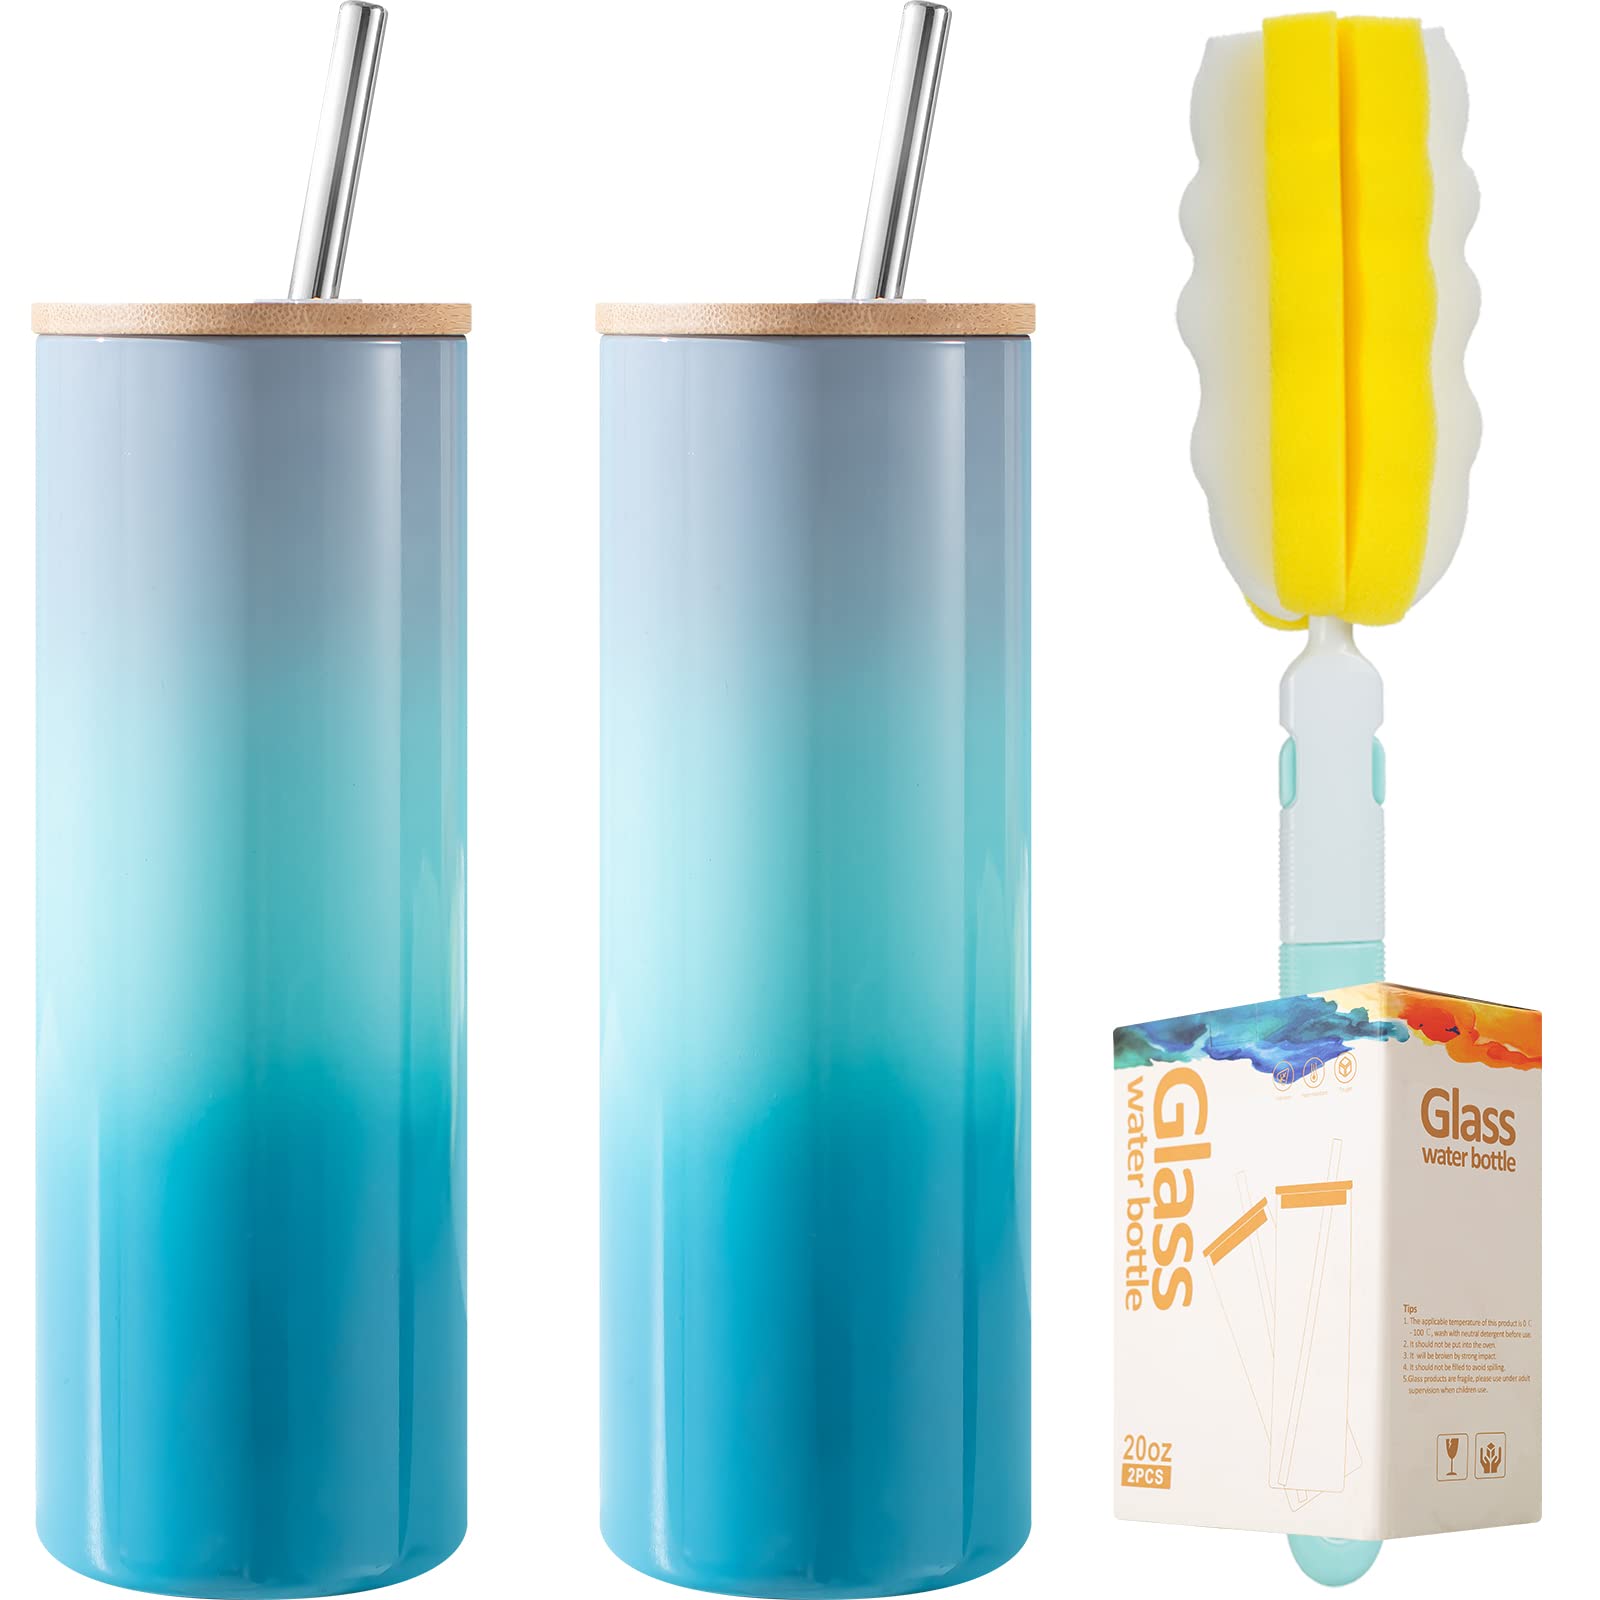 GoldArea 2 Pack Glass Cups with Bamboo Lids and Straws, 20 oz Drinking Glasses, Glass Tumbler Cup, Glass Water Bottles, Iced Coffee Tumbler, Water Tumbler, A Cleaning Brush Included